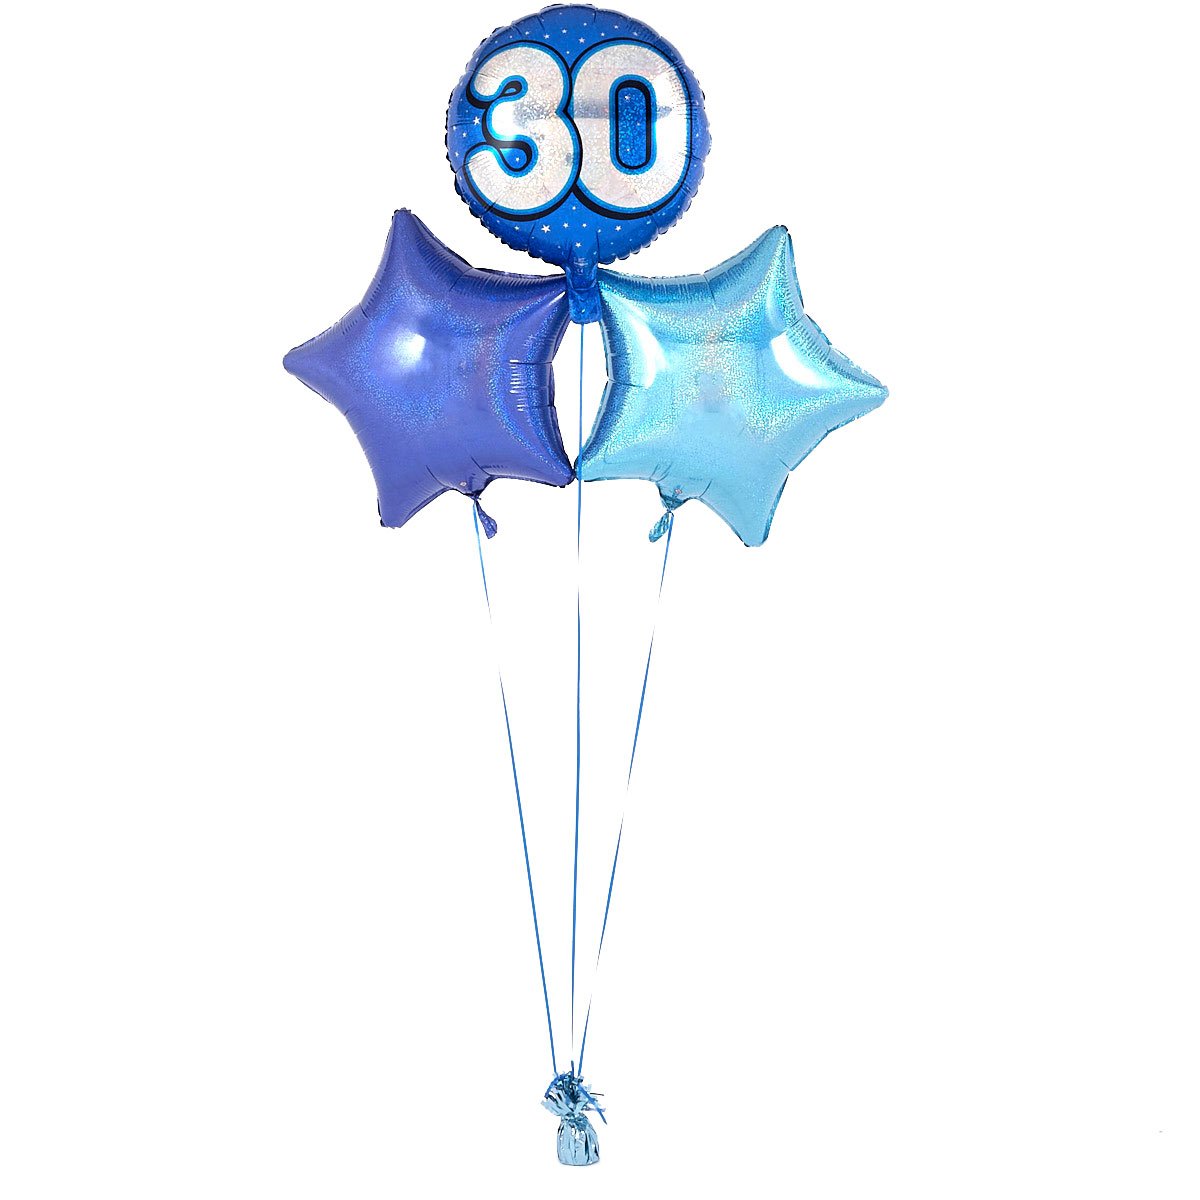 Blue 30th Birthday Balloon Bouquet - DELIVERED INFLATED!